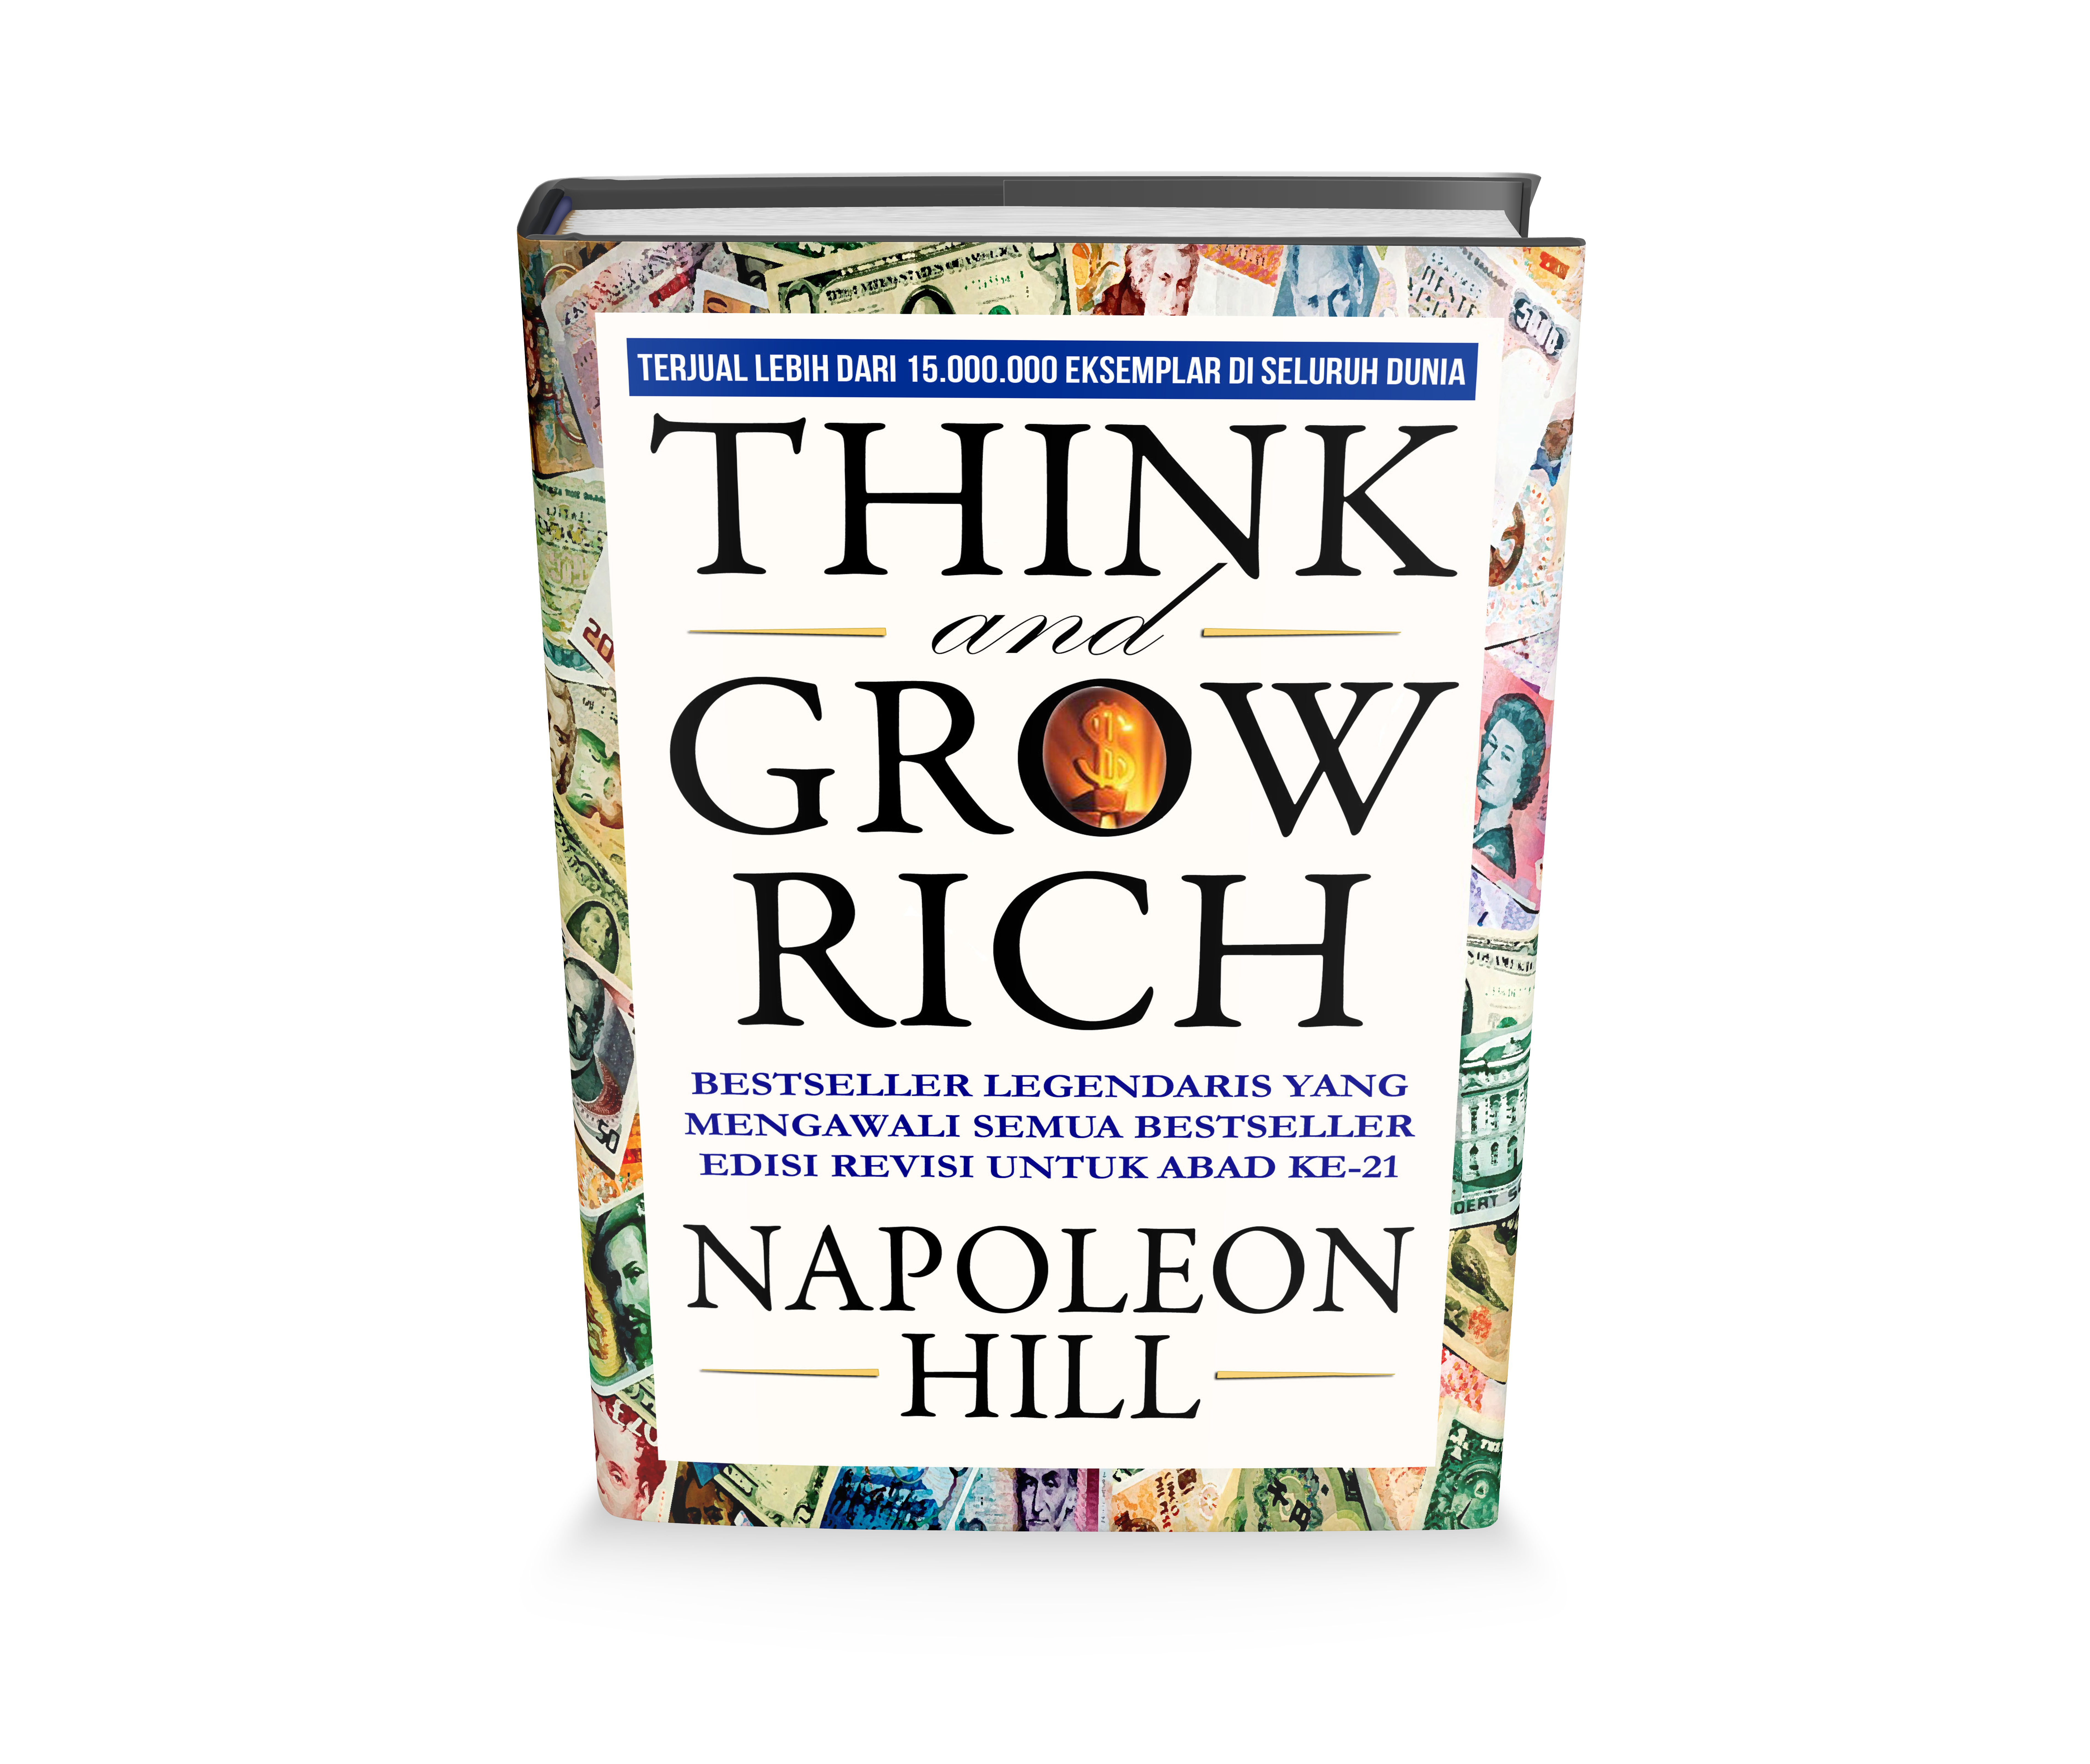 ebook think and grow rich bahasa indonesia pdf viewer